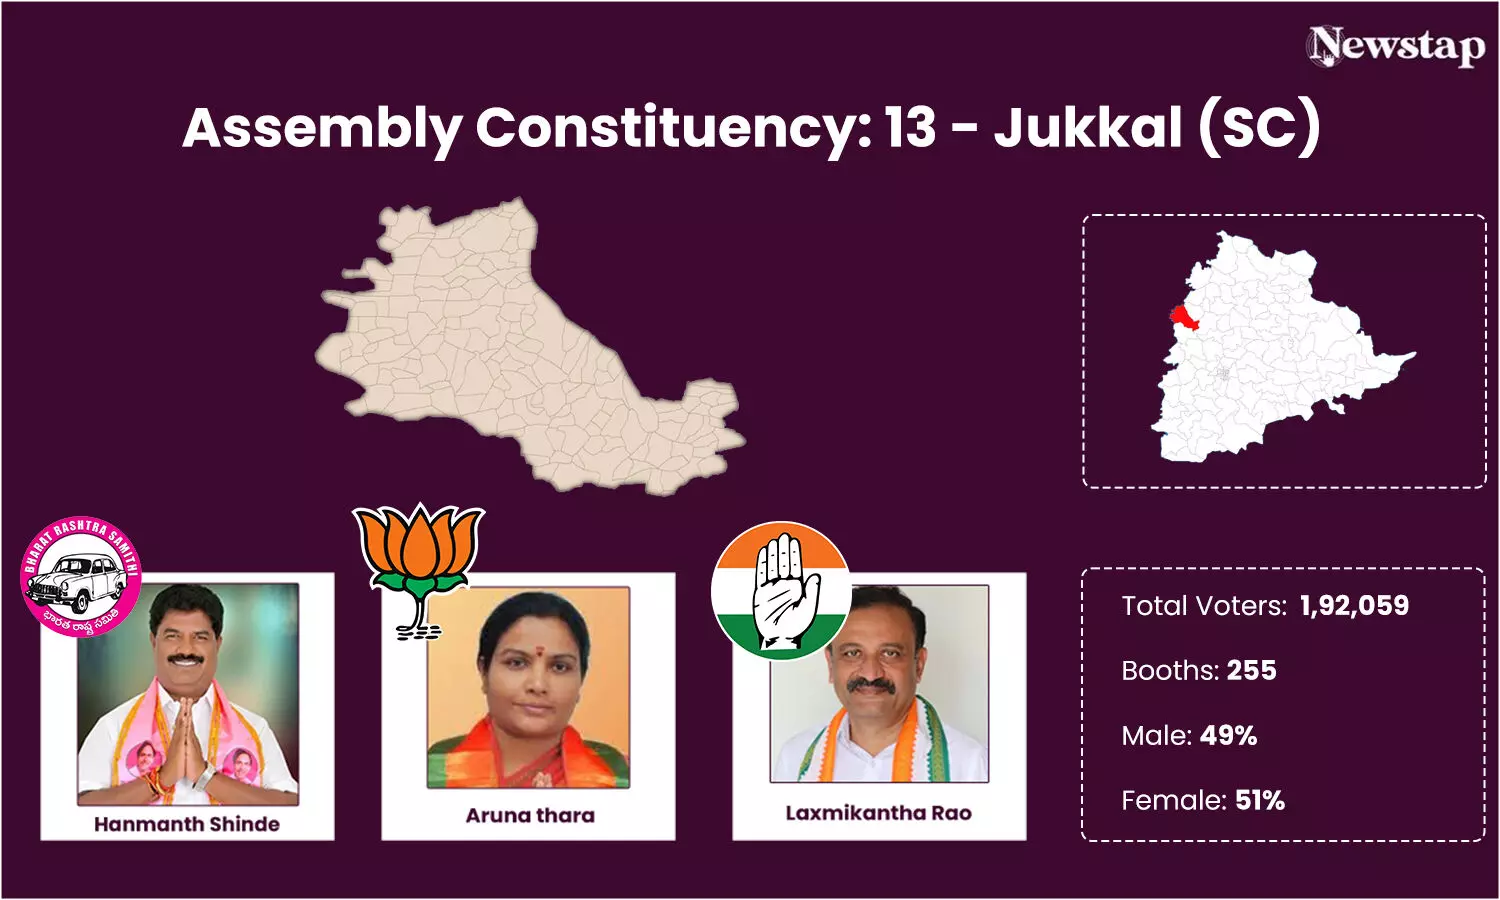 Engineer, lawyer, doctorate contesting in Jukkal, Hanmanth Shinde of BRS  firmly placed , opponents cant be underestimated